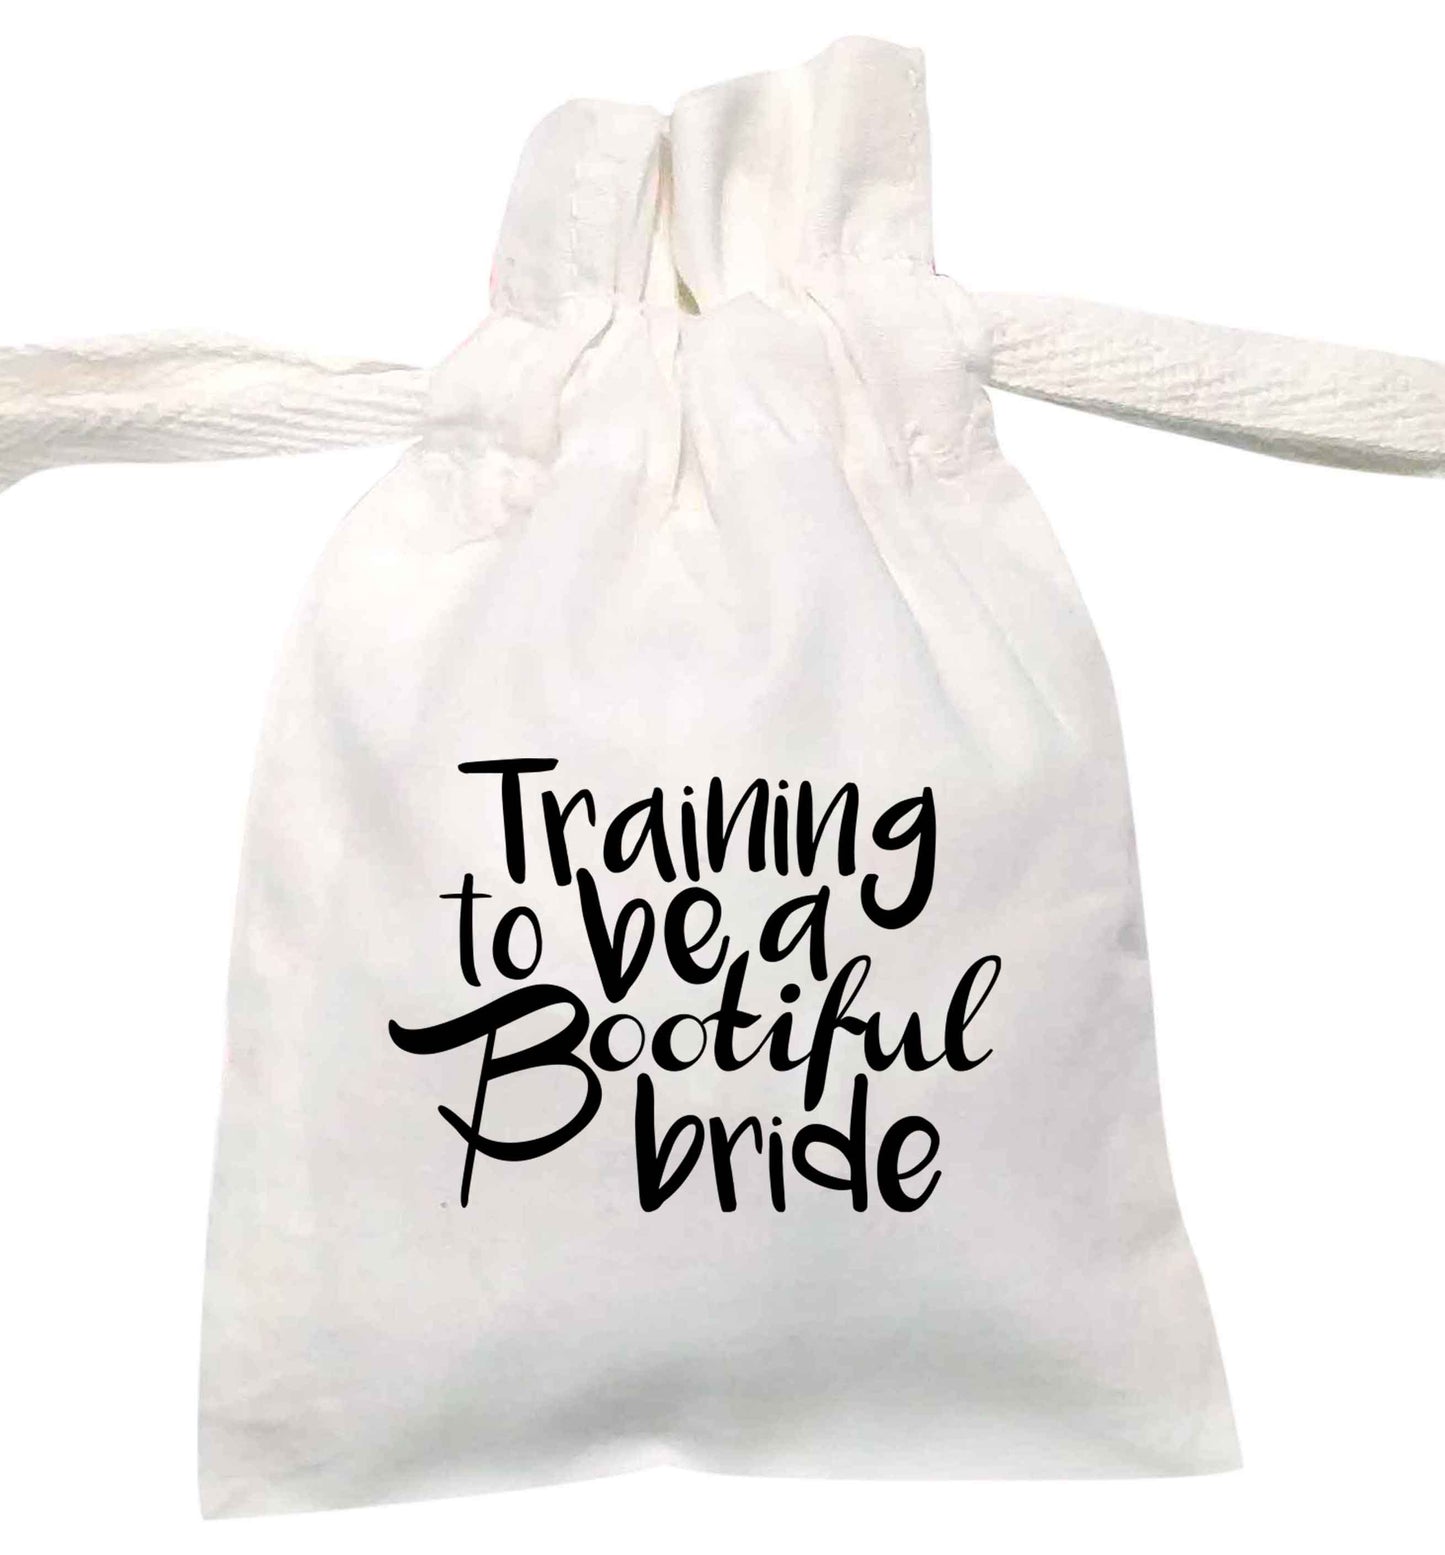 Training to be a bootifull bride | XS - L | Pouch / Drawstring bag / Sack | Organic Cotton | Bulk discounts available!